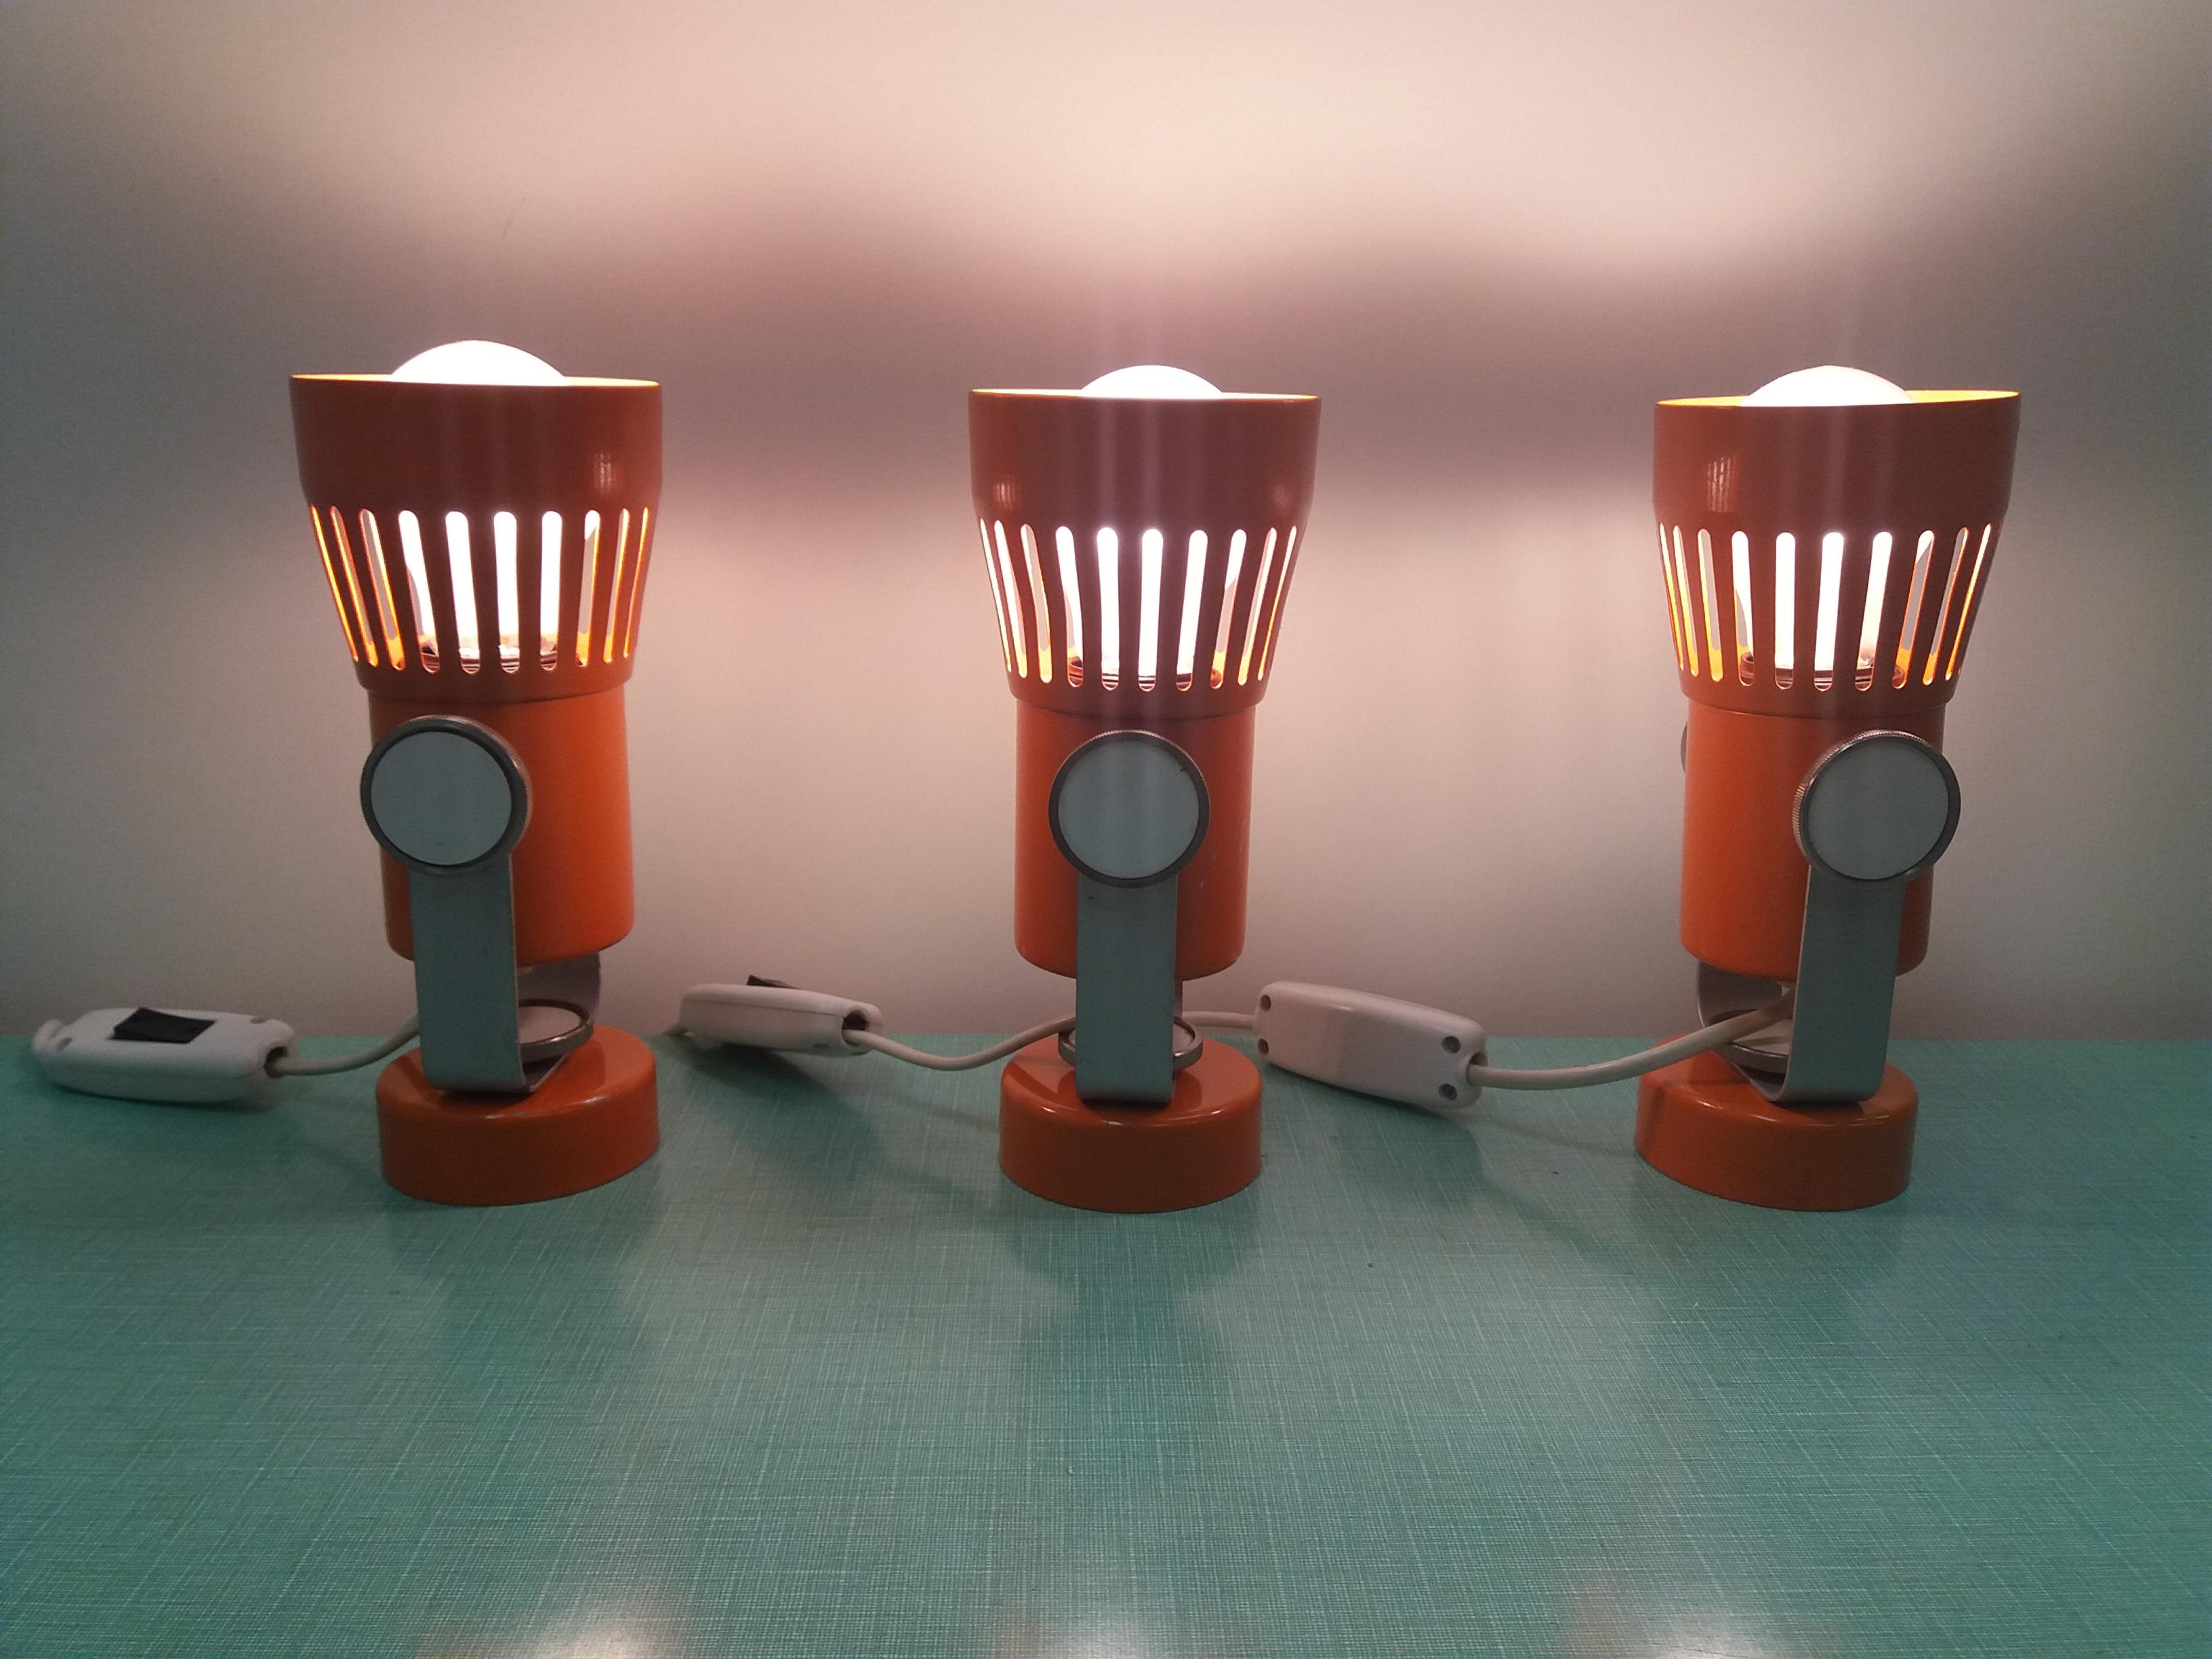 Czech Set of Three Table or Wall Lamps Designed by Pavel Grus for Drupol, 1970s